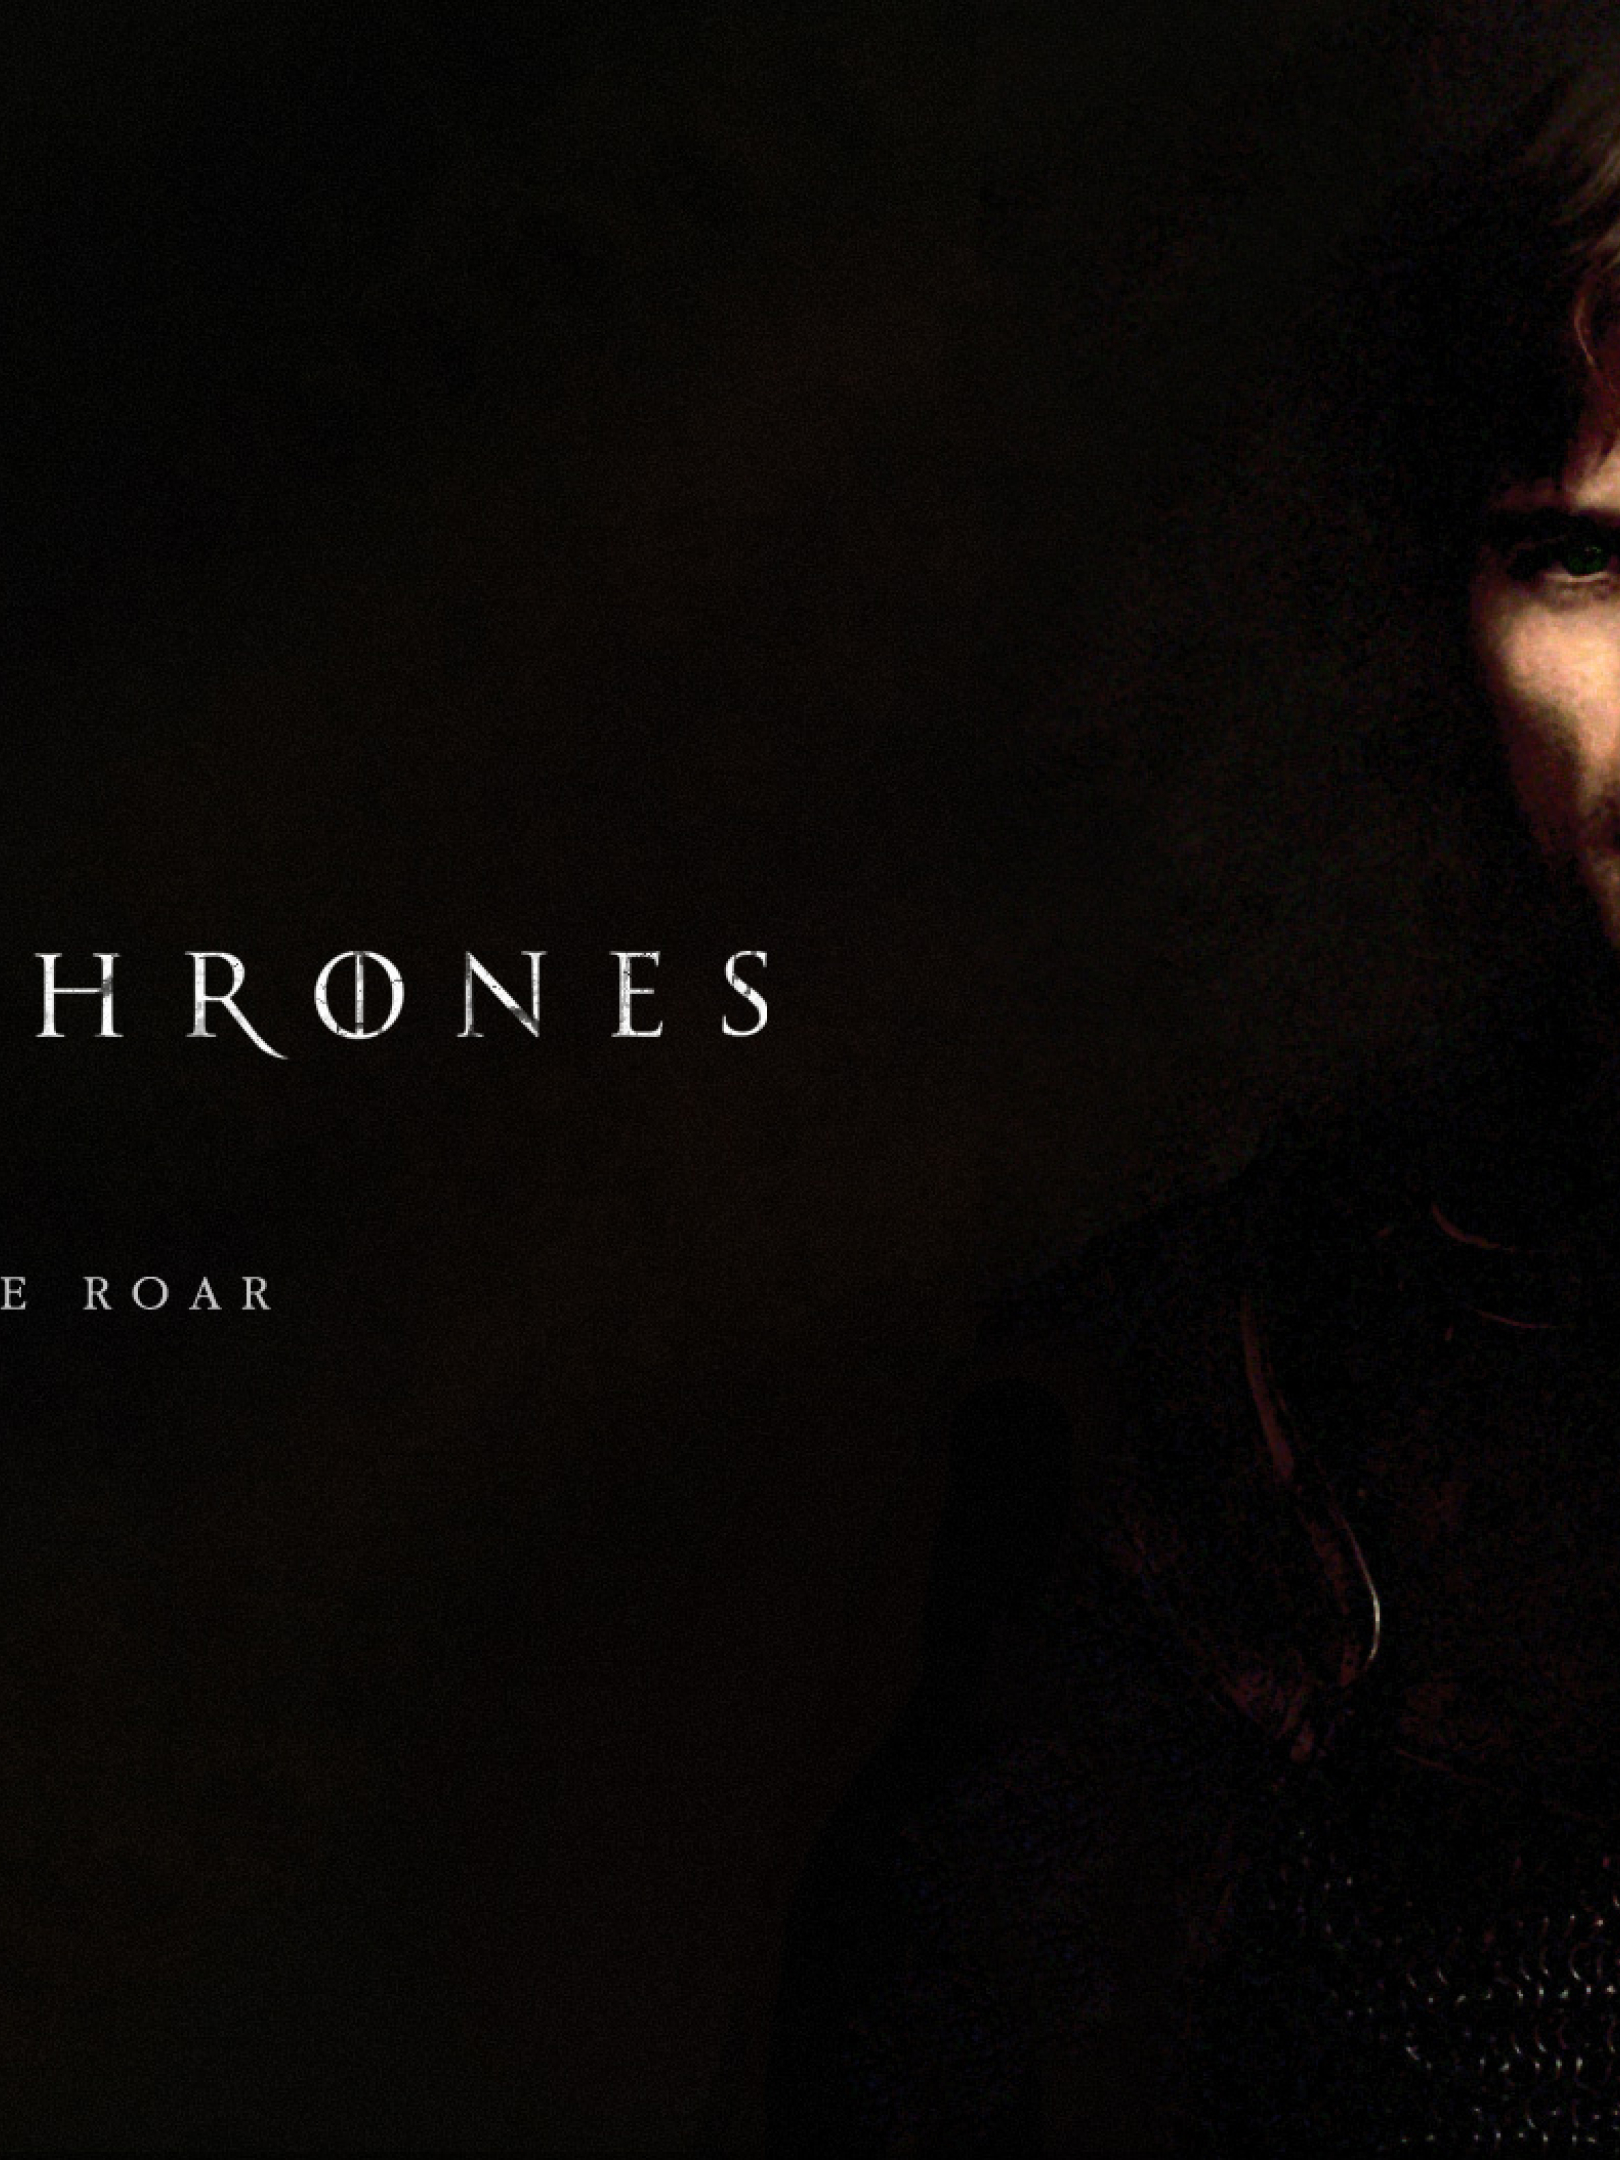 1620x2160 Game Of Thrones High Resolution Wallpaper 1620x2160 Images, Photos, Reviews